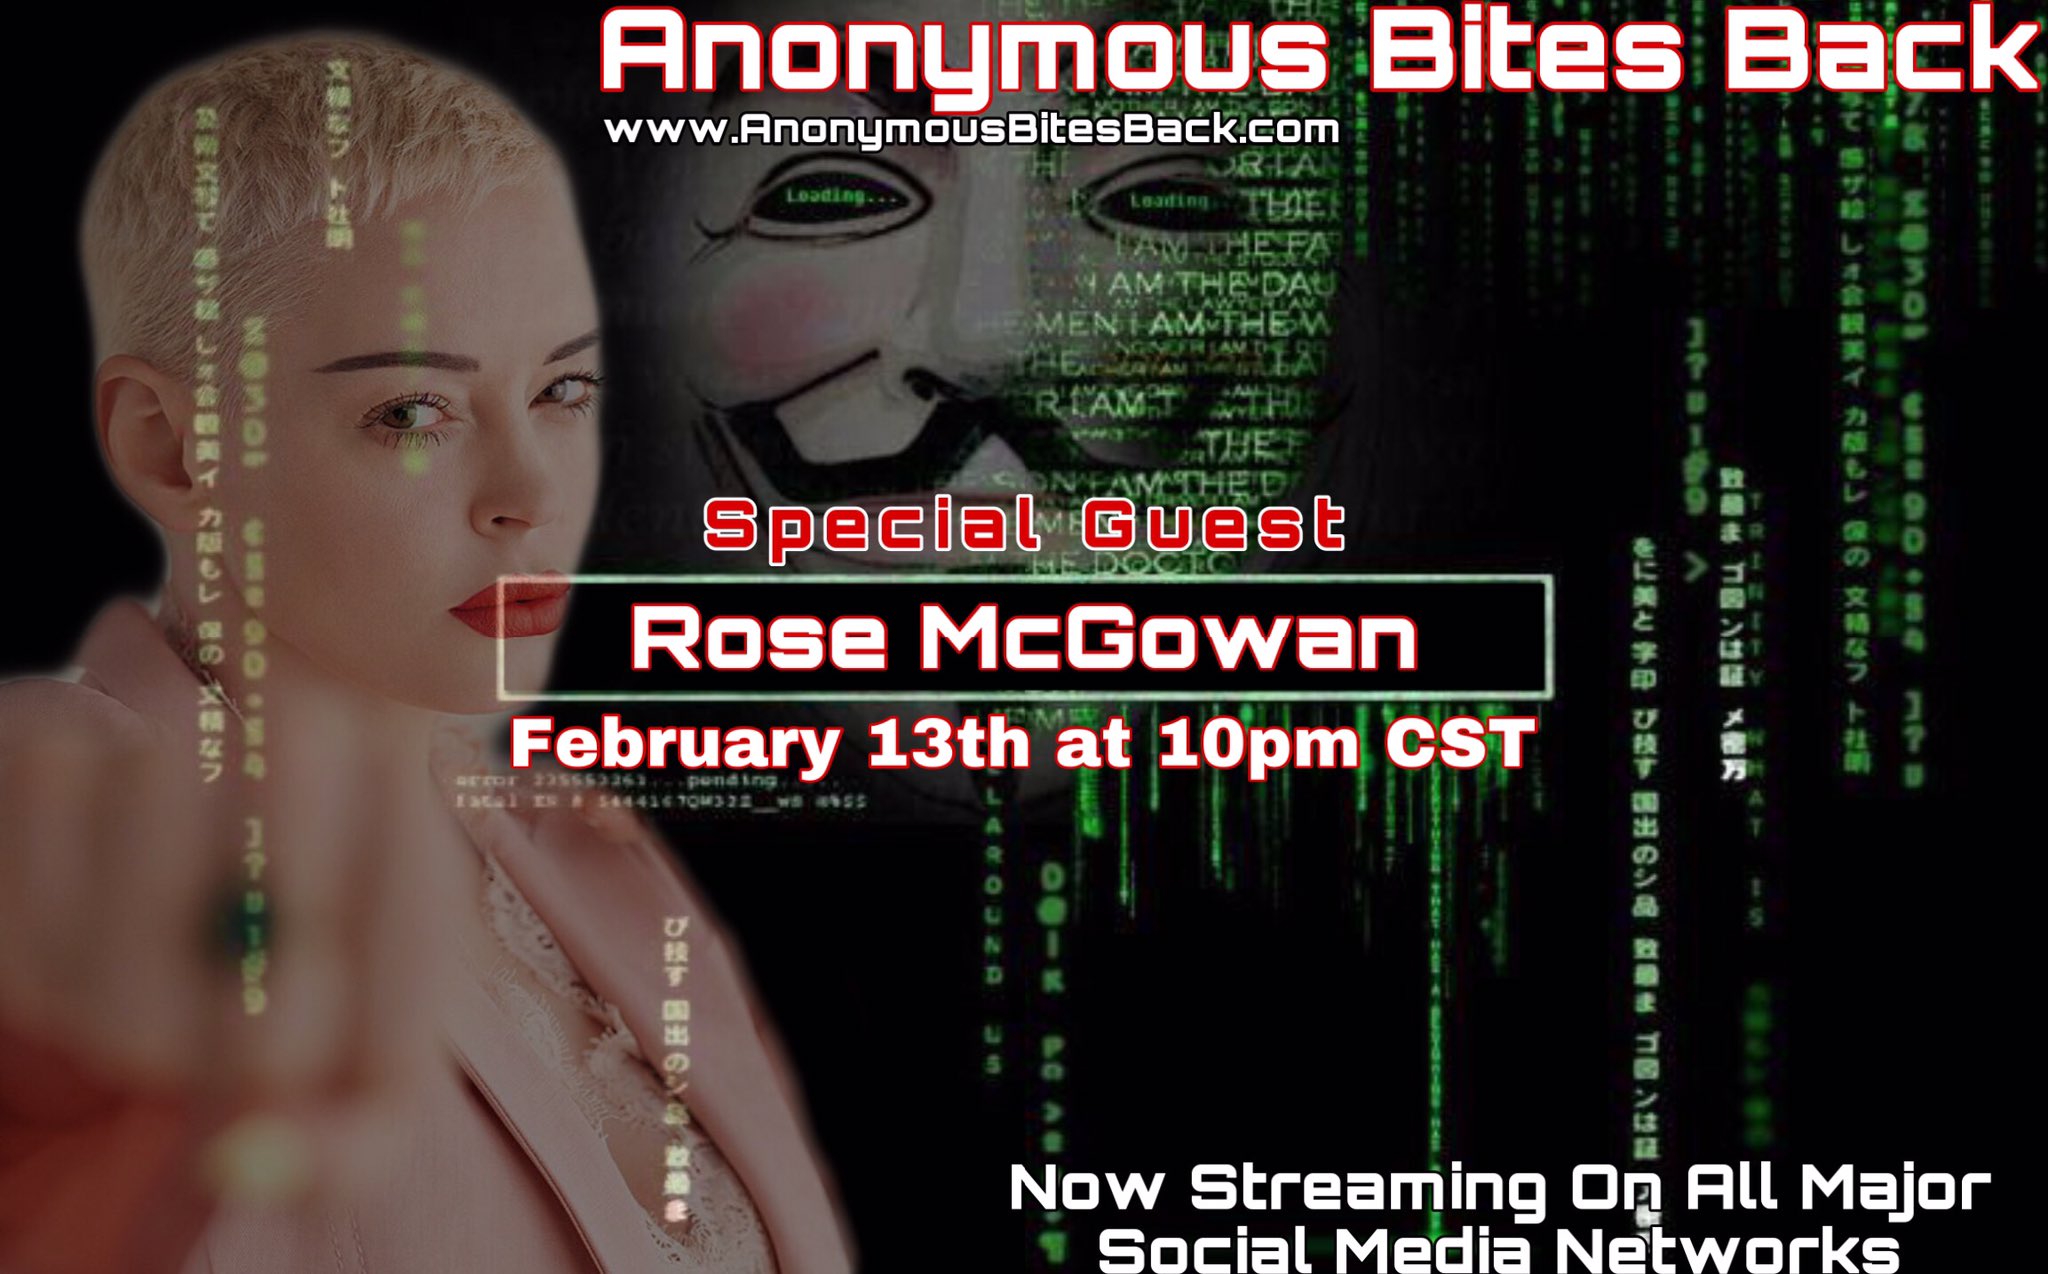 Rose McGowan joins Anonymous Bites Back live on air